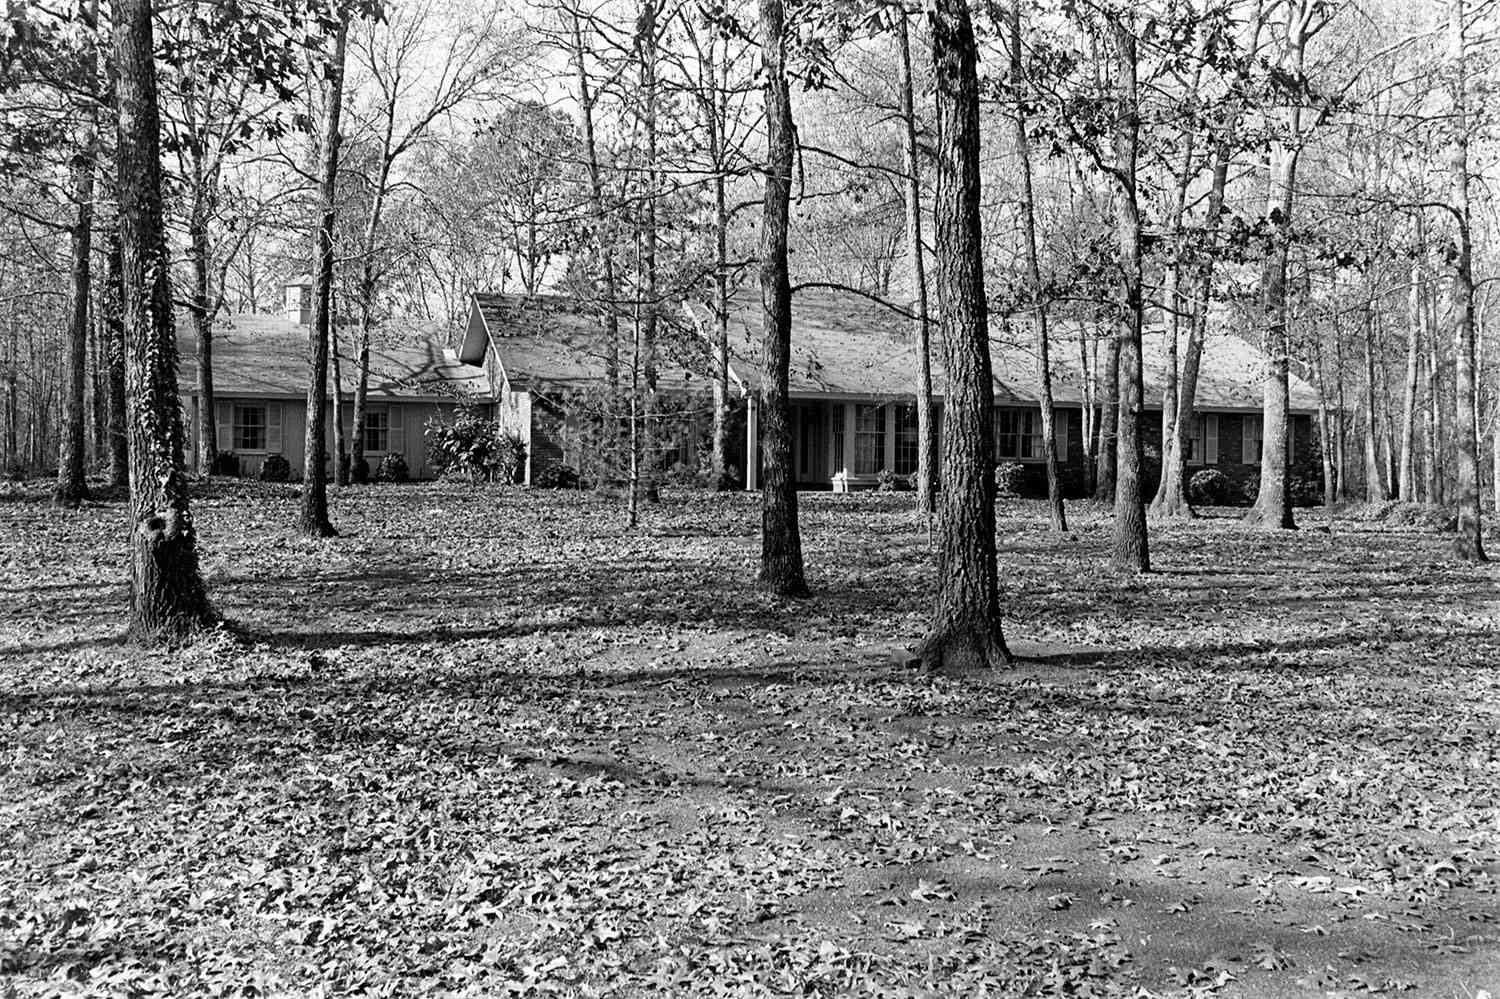 Jimmy Carter's home in Plains, Georgia, is seen during the fall 1976 presidential campaign